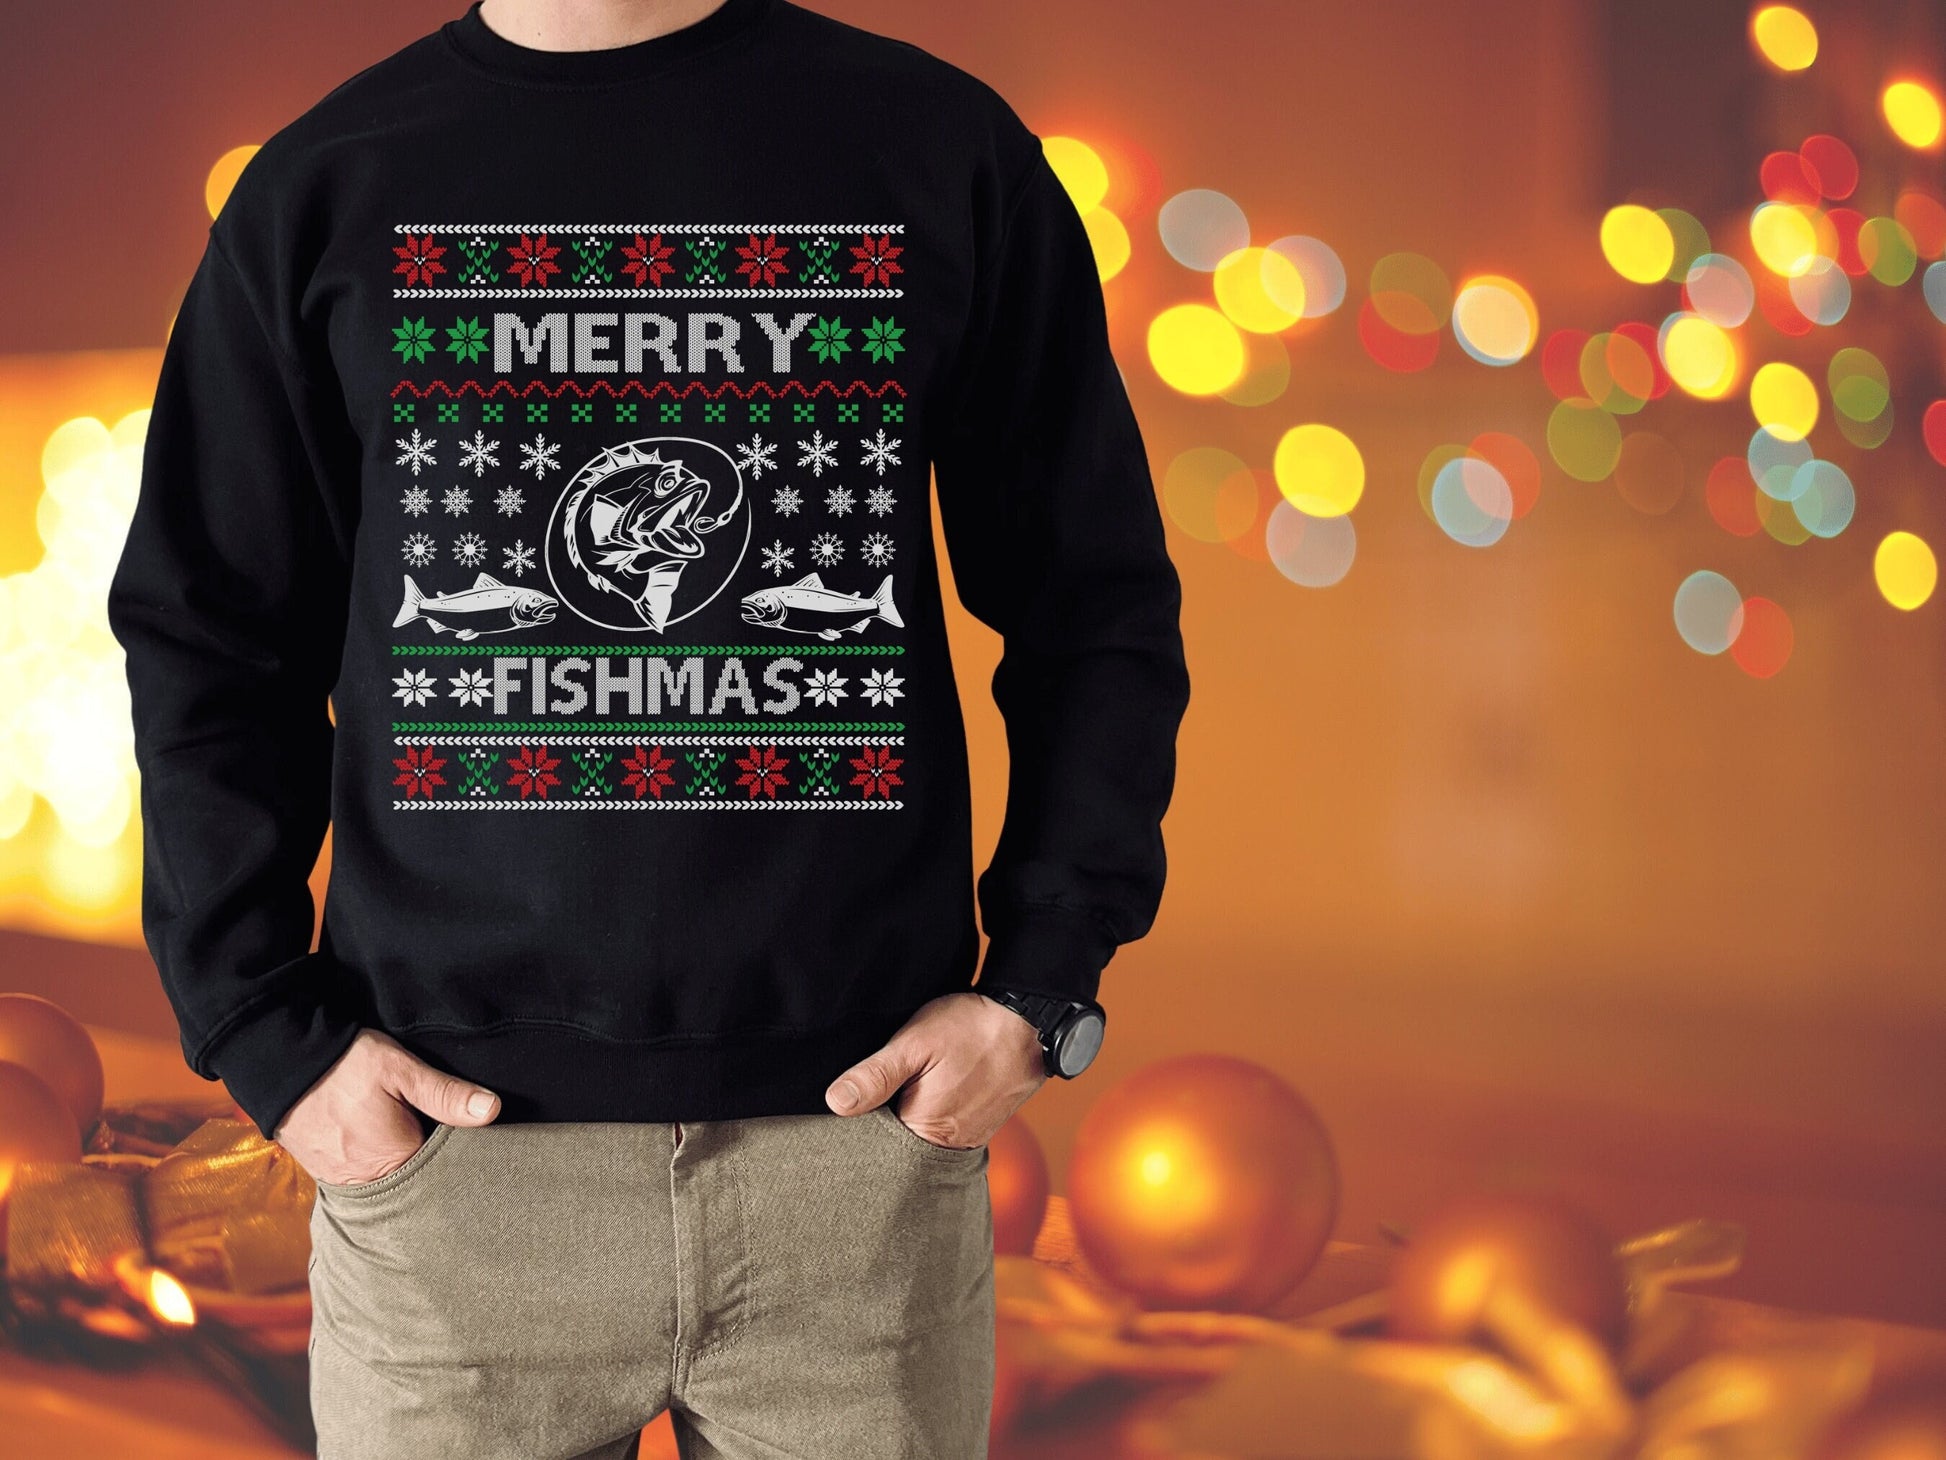 Fishing Gifts for Men, Ugly Christmas Sweater for Men, Merry Fishmas Ugly Christmas Sweater, Merry Fishmas Fishing Ugly Christmas Sweater - Mardonyx